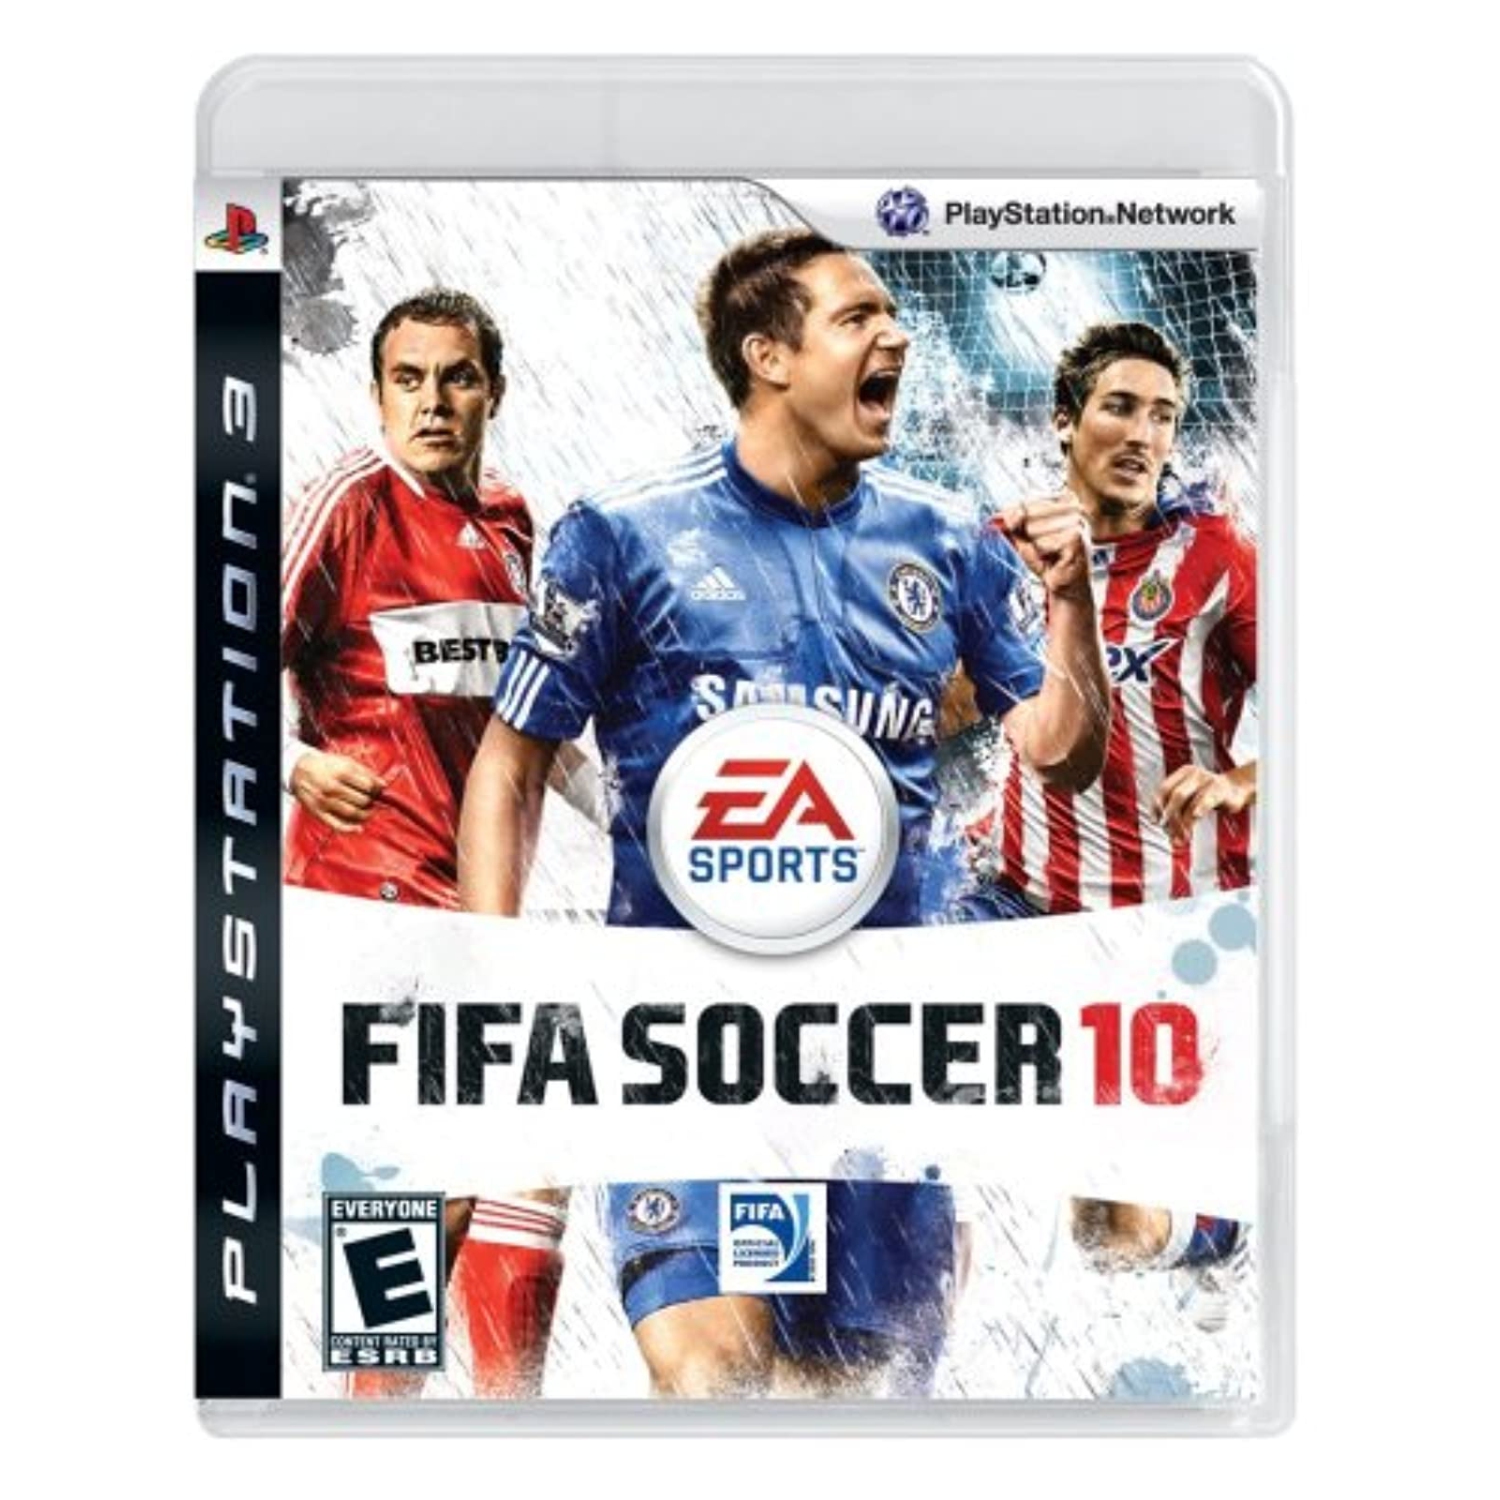 Previously Played - FIFA Soccer 10 For PlayStation 3 PS3 With Manual And Case